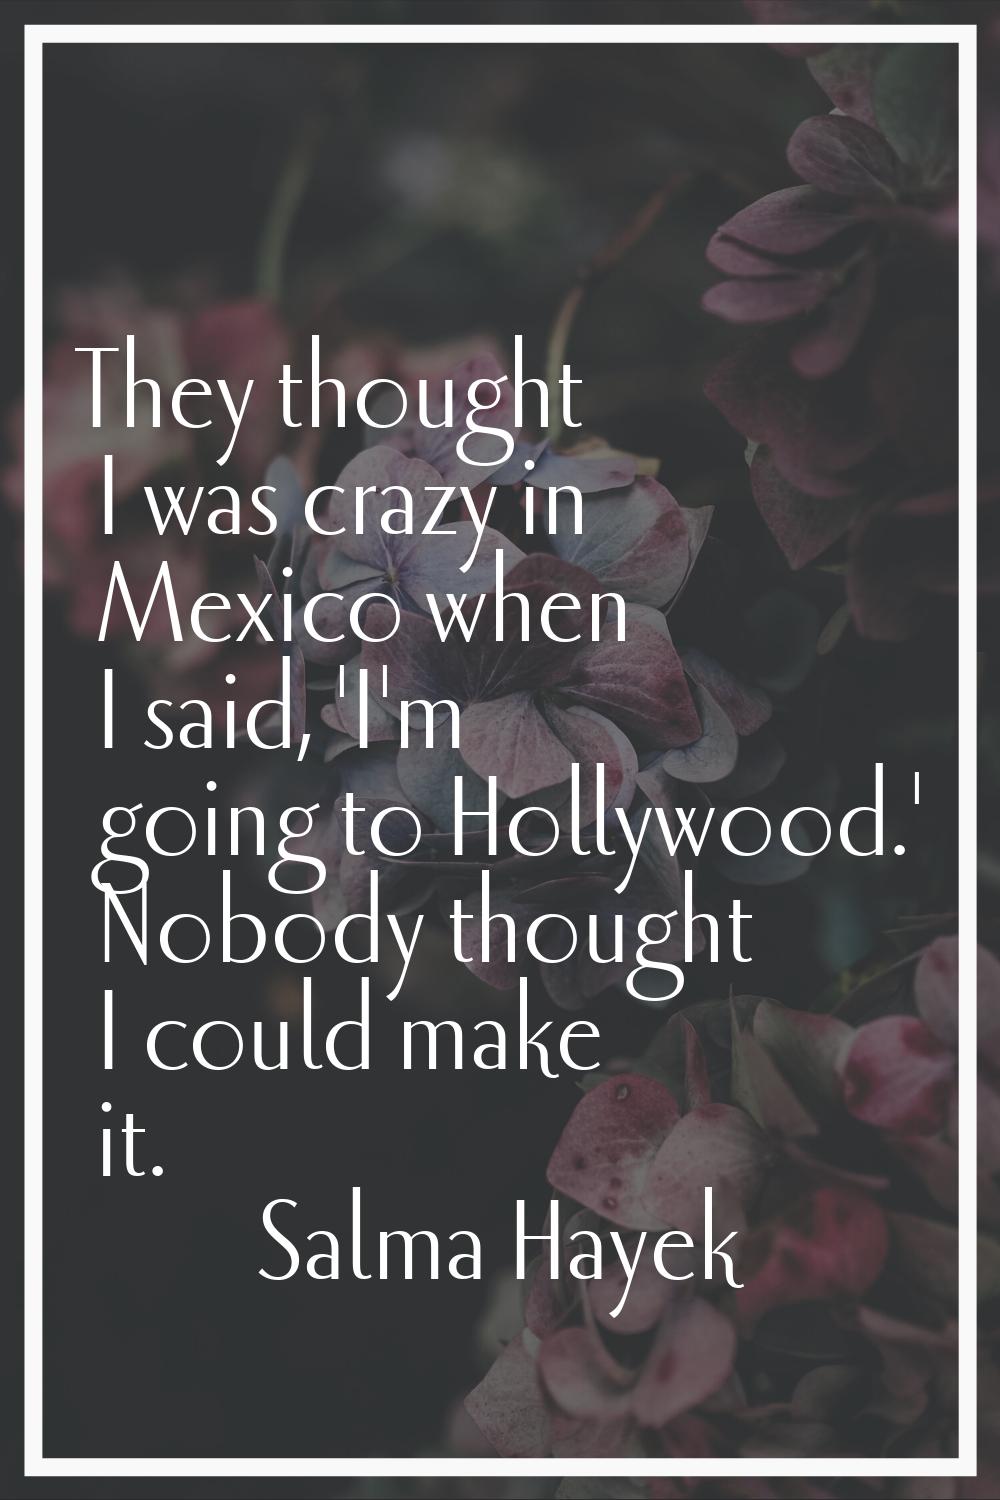 They thought I was crazy in Mexico when I said, 'I'm going to Hollywood.' Nobody thought I could ma